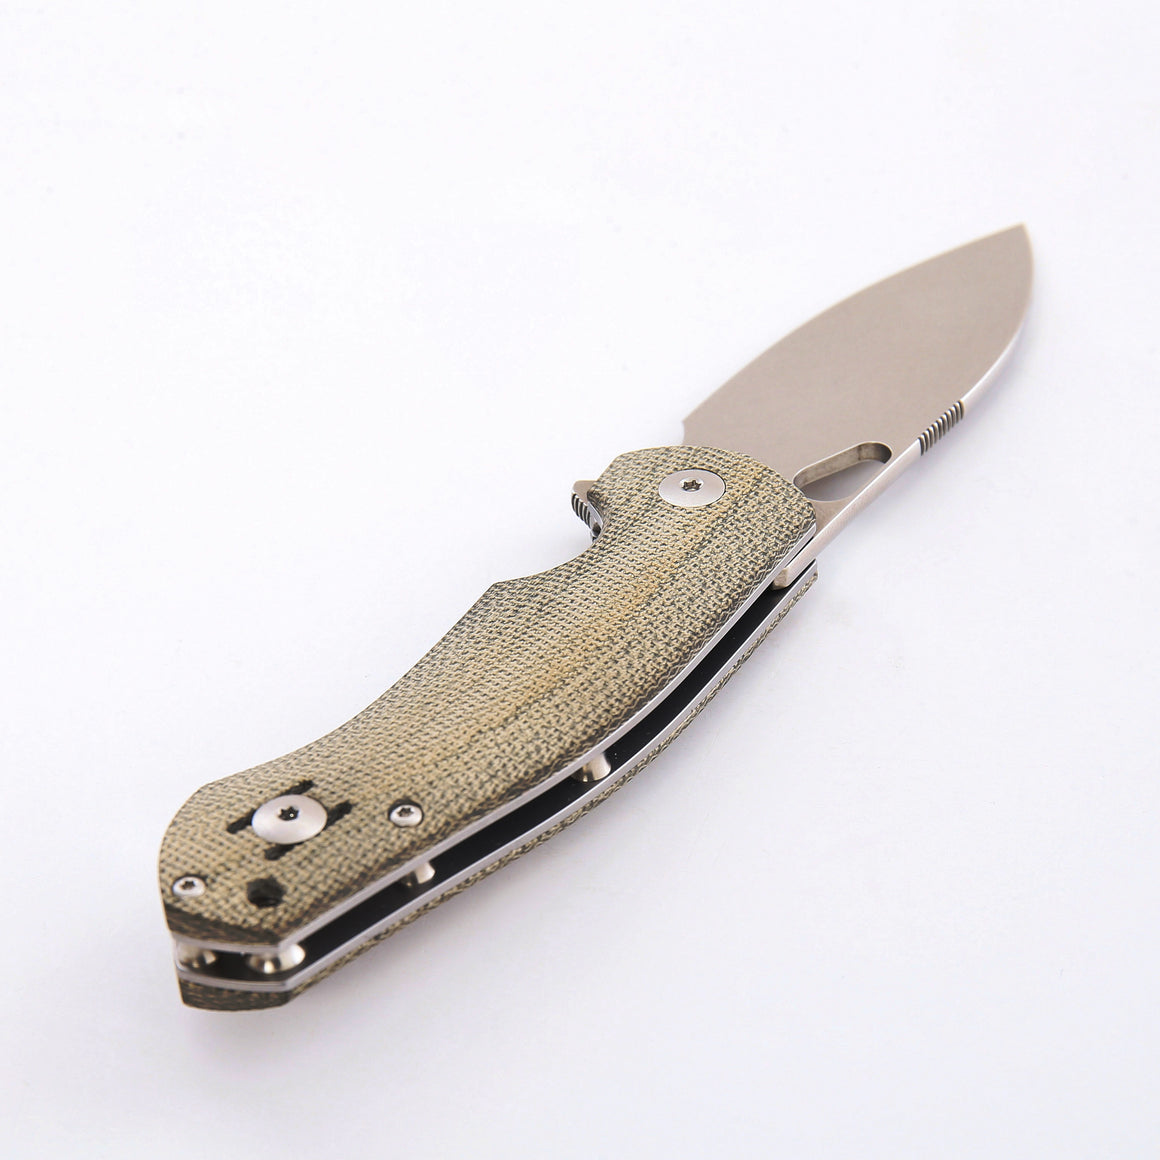 ACE Biblio - Green Canvas Micarta - GiantMouse Knives - Anso Vox Collaborations